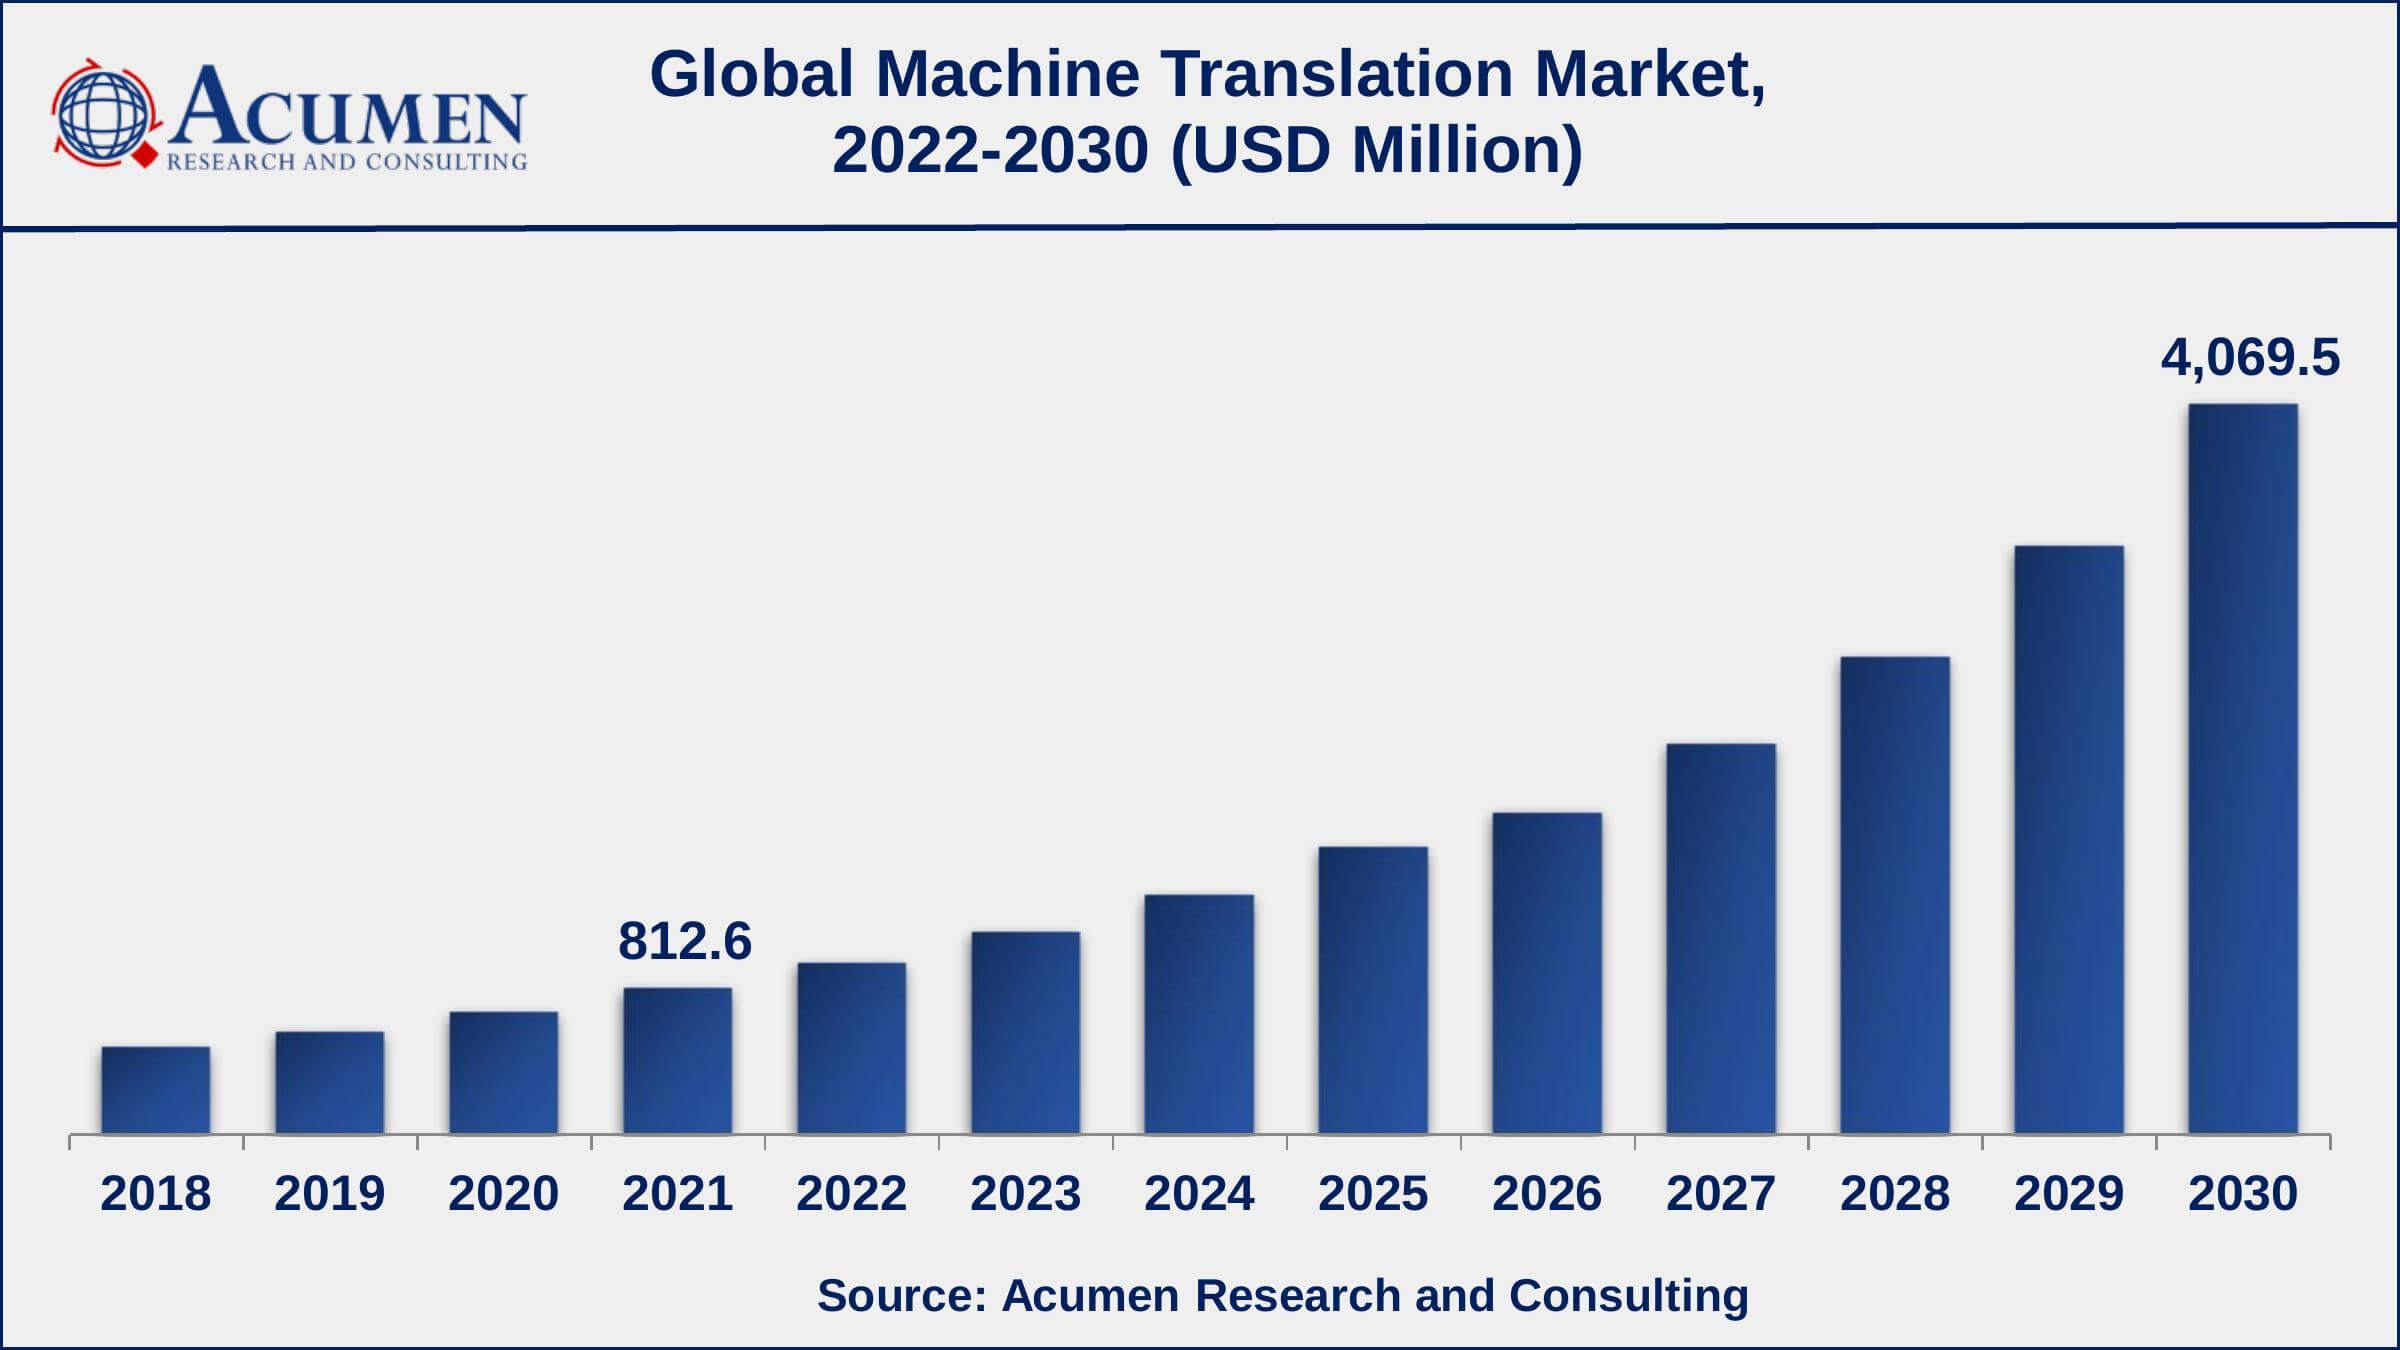 Asia-Pacific machine translation market growth will record a CAGR of more than 20% from 2022 to 2030